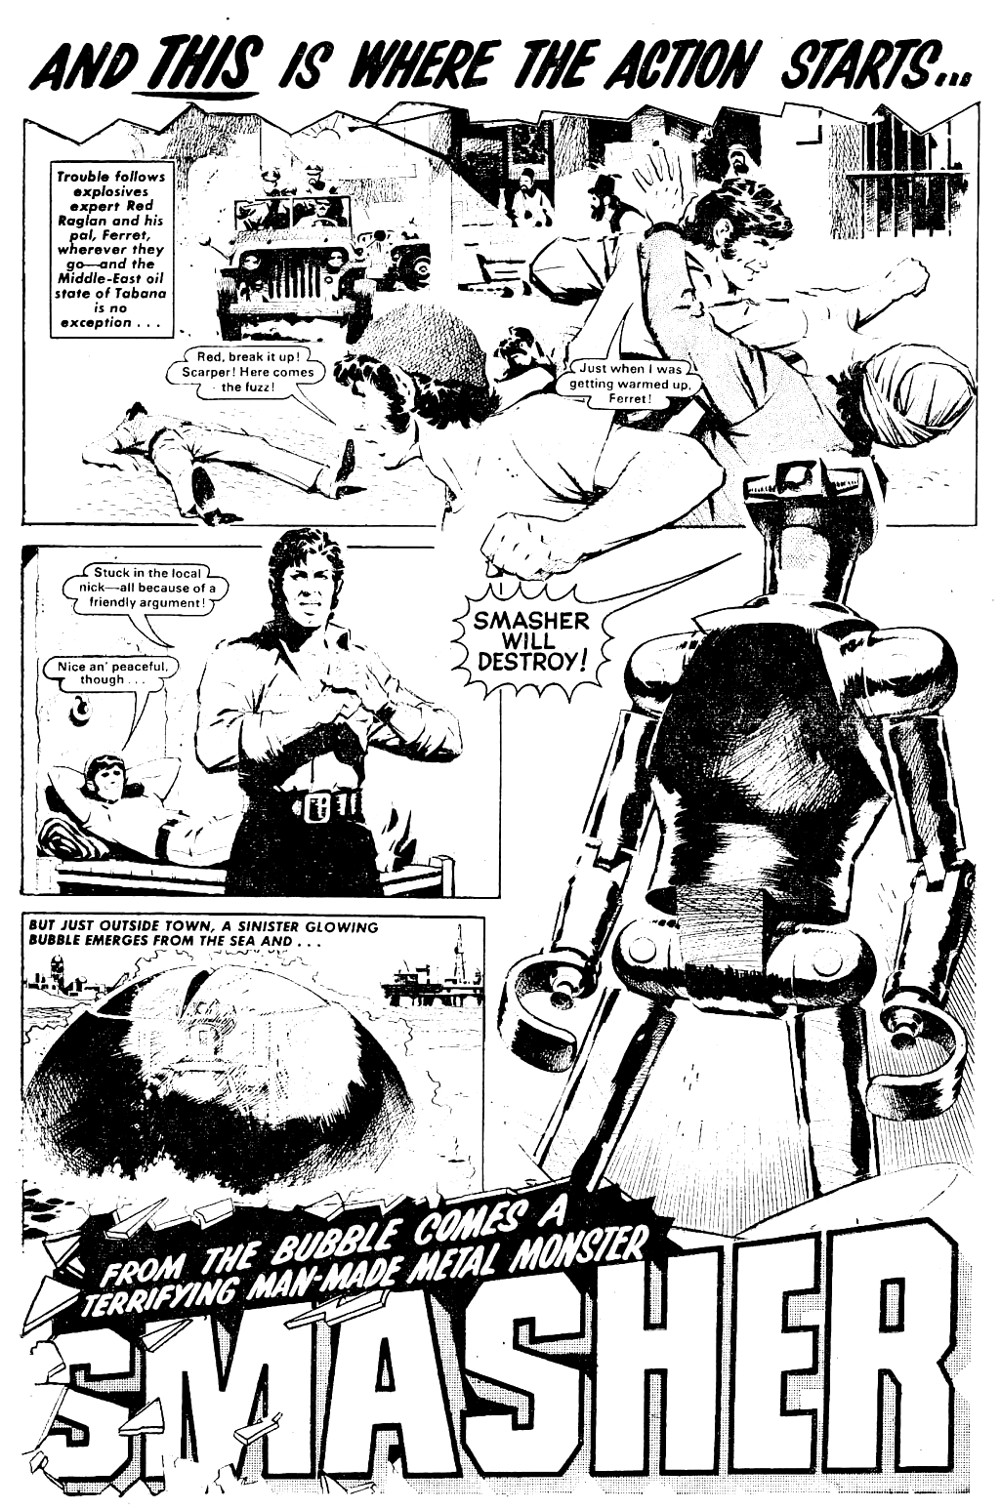 Art by Ian Kennedy for "Smasher", for the first issue of the DC Thomson title Bullet